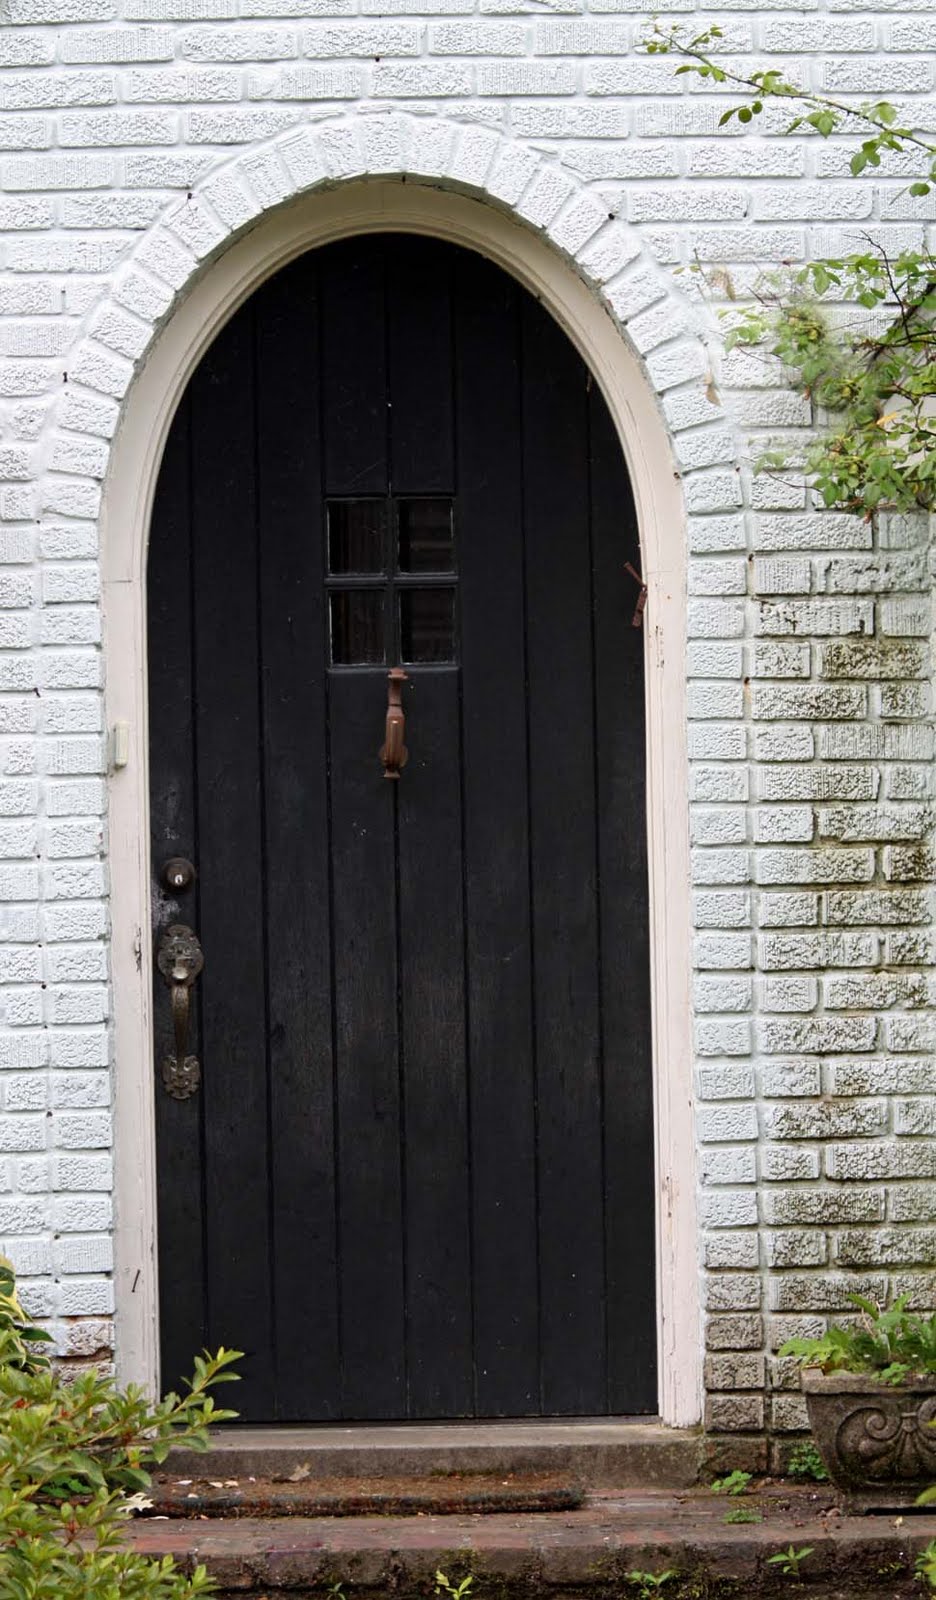 Southern Lagniappe: The Curb Appeal of Doors